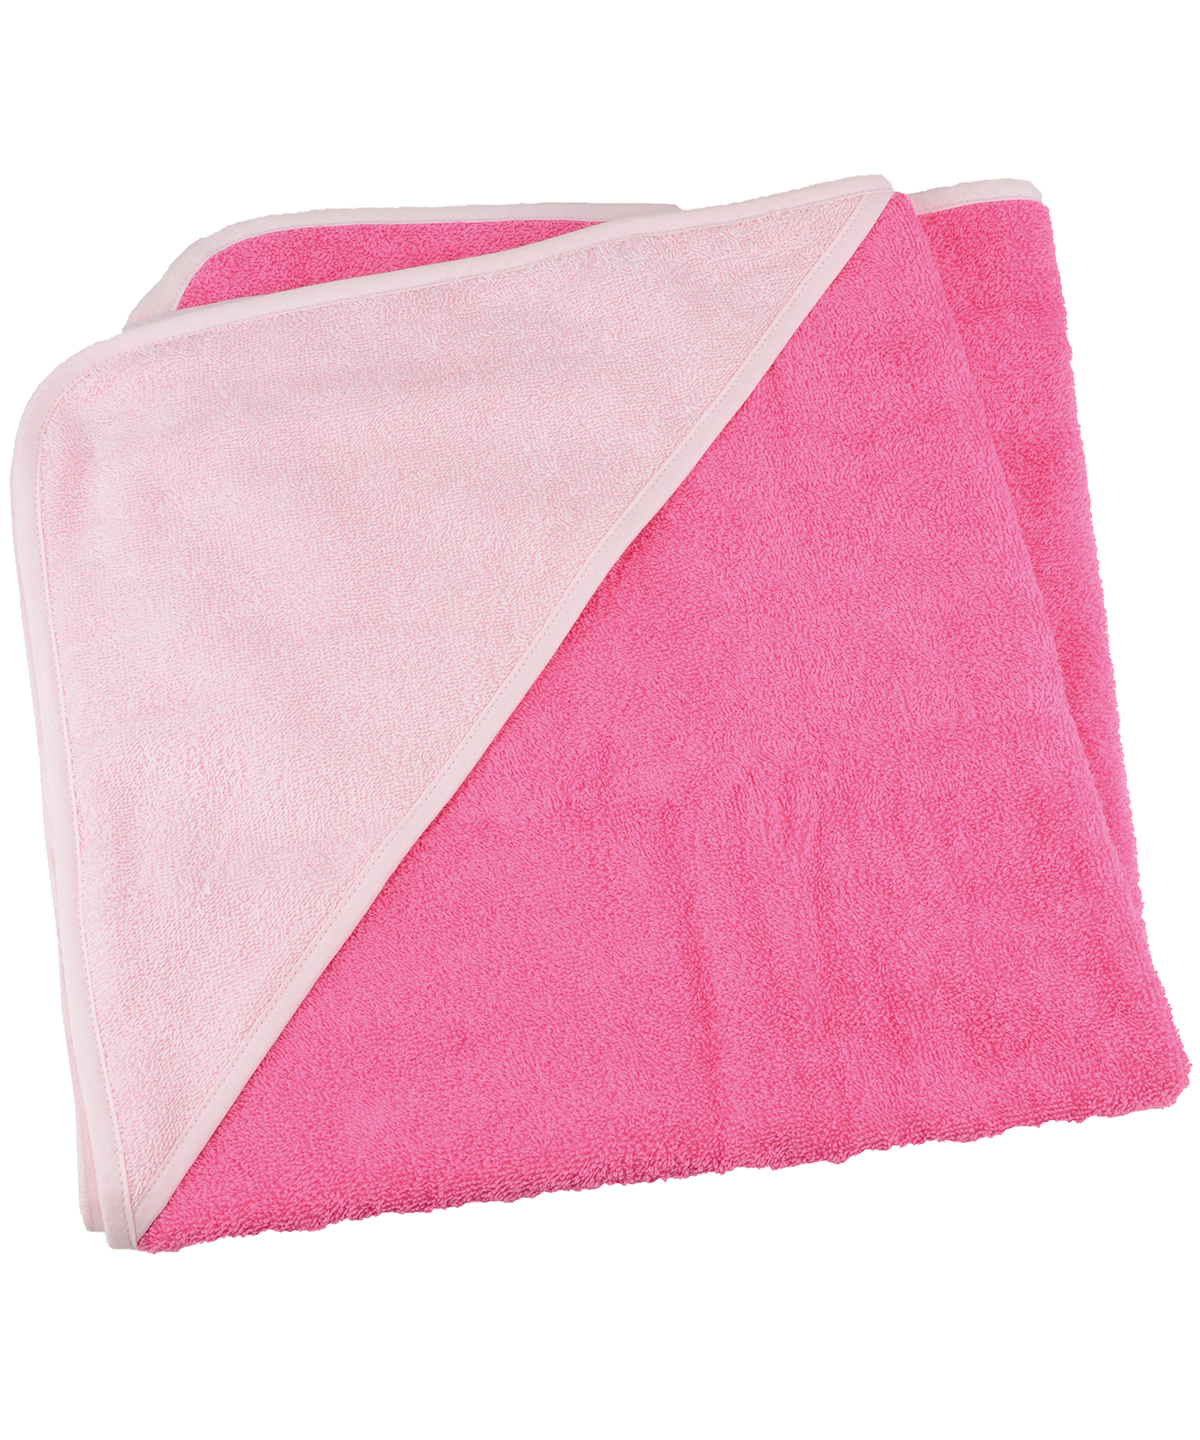 Babiezz® Medium Baby Hooded Towel Pink/Light Pink/Light Pink Size One Size